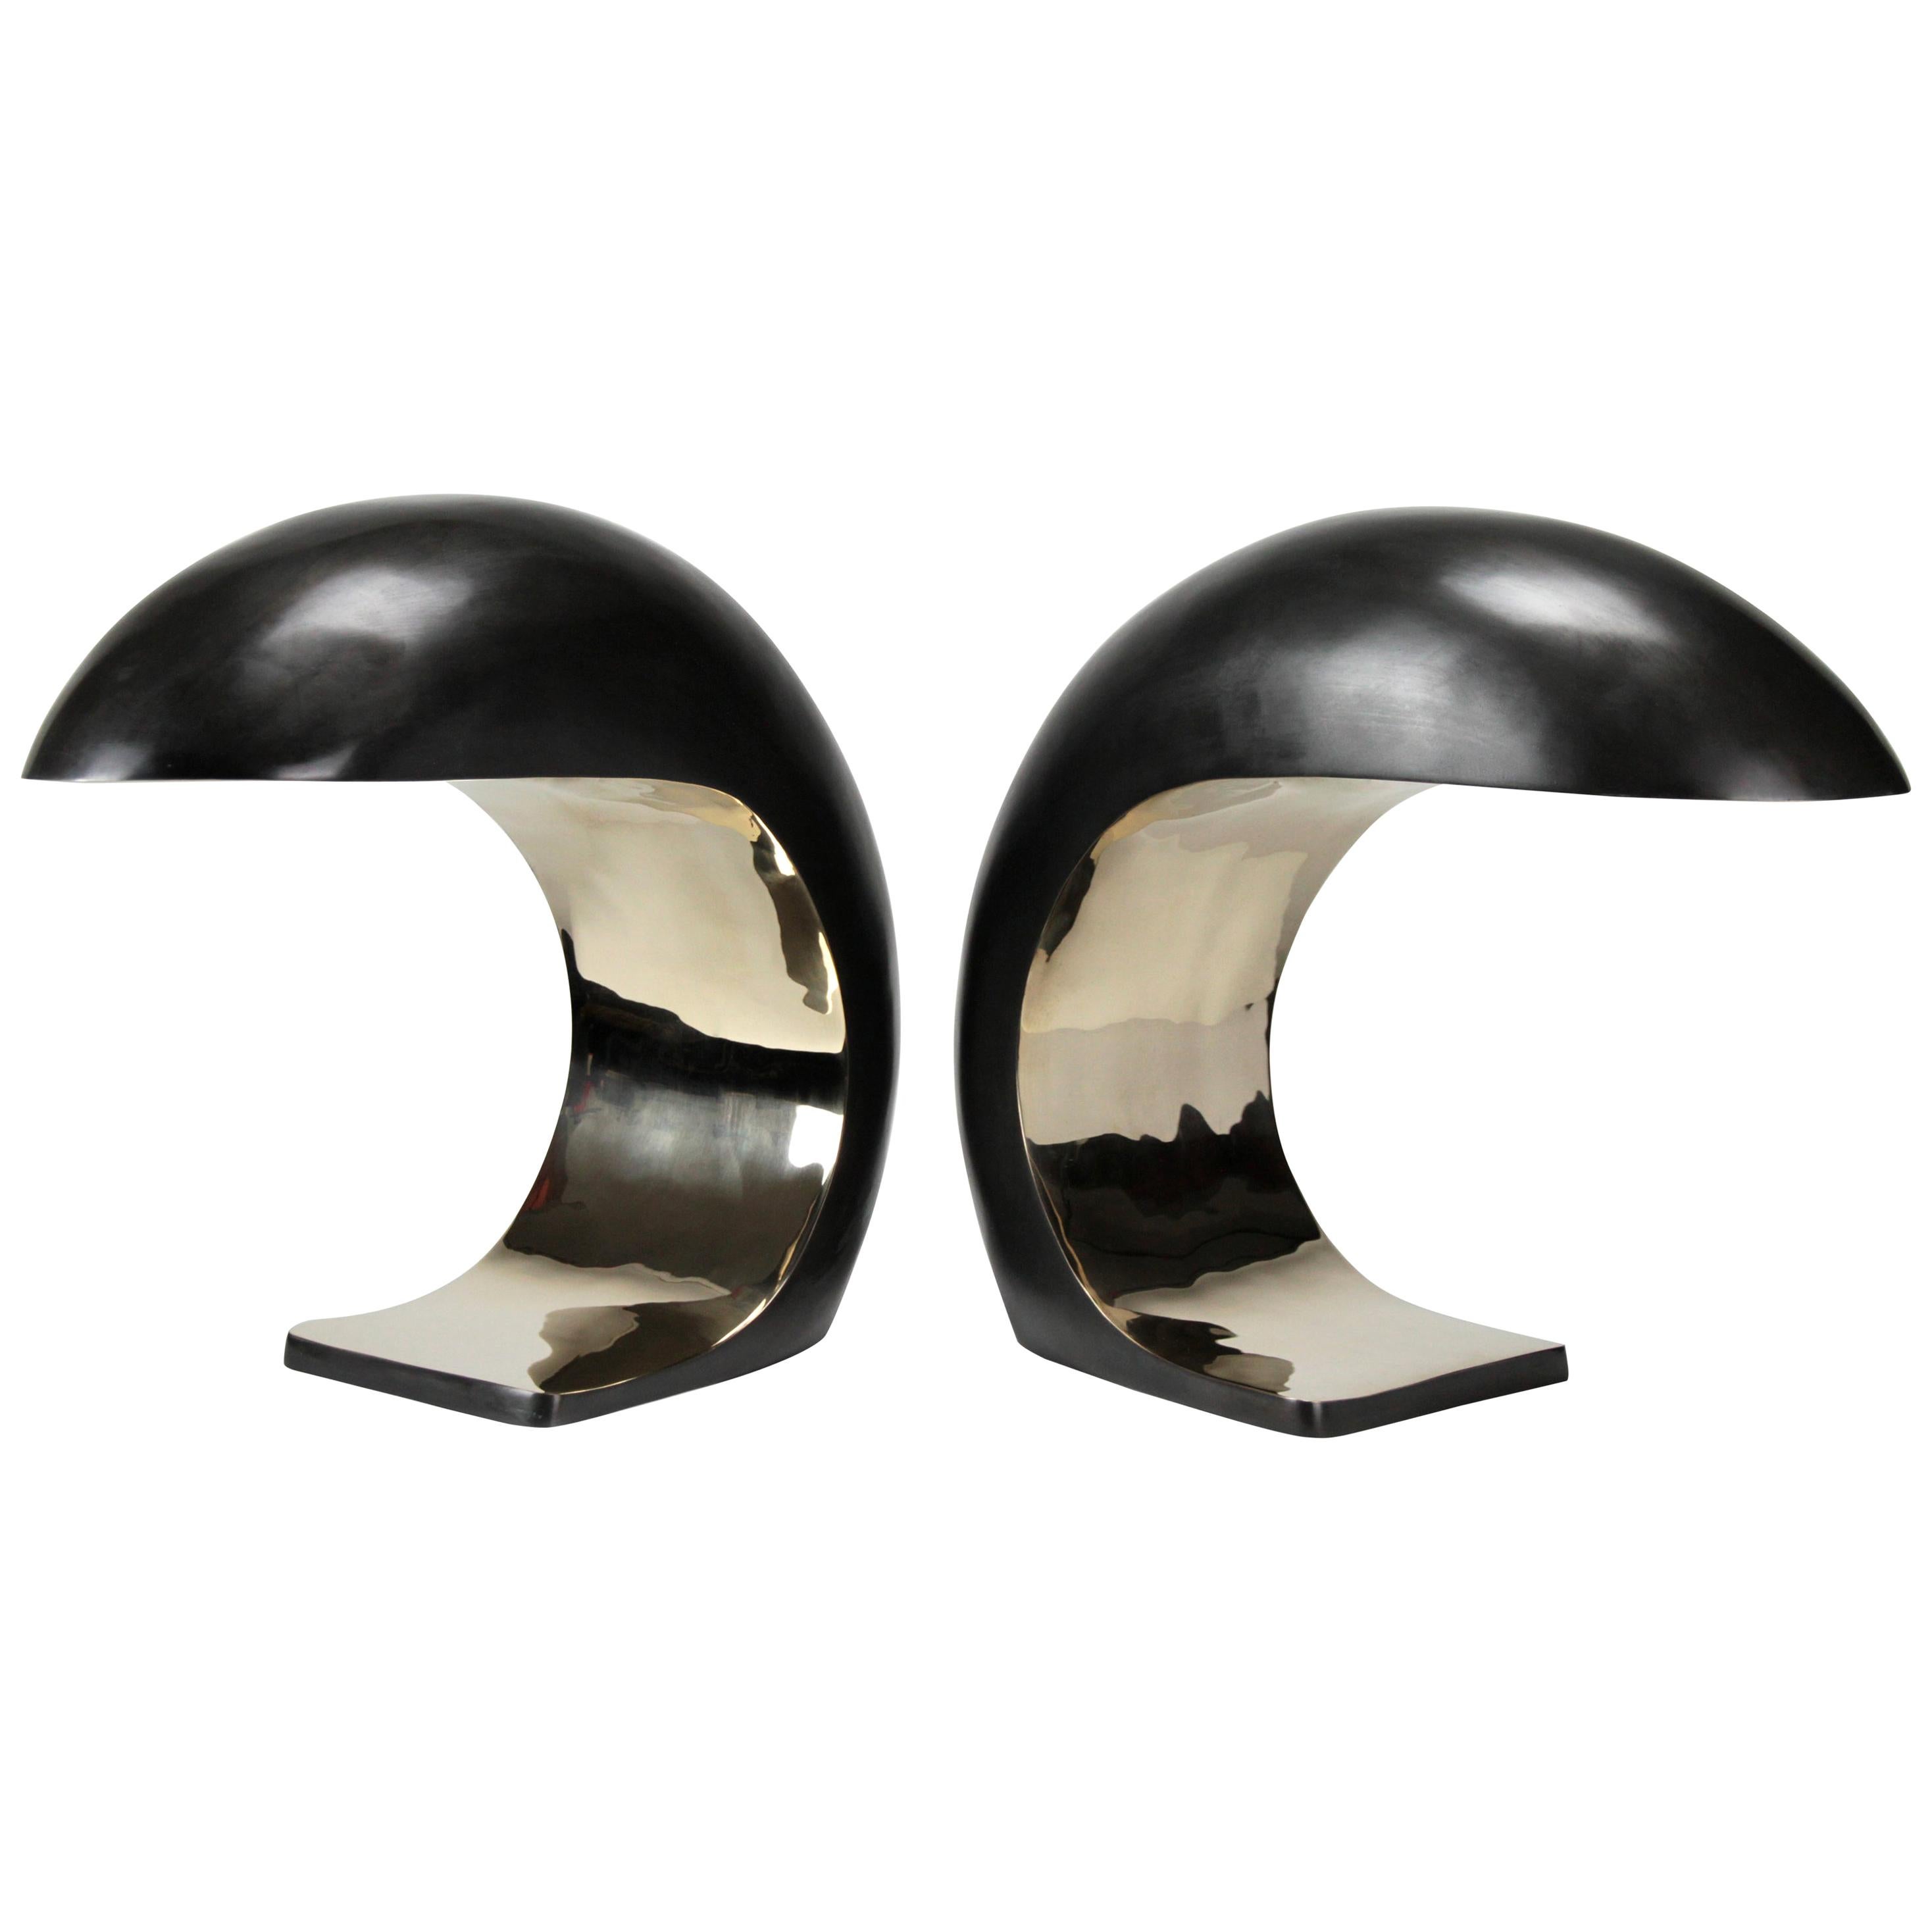 Pair of Nautilus Study Table Lamps in Cast Bronze by Christopher Kreiling